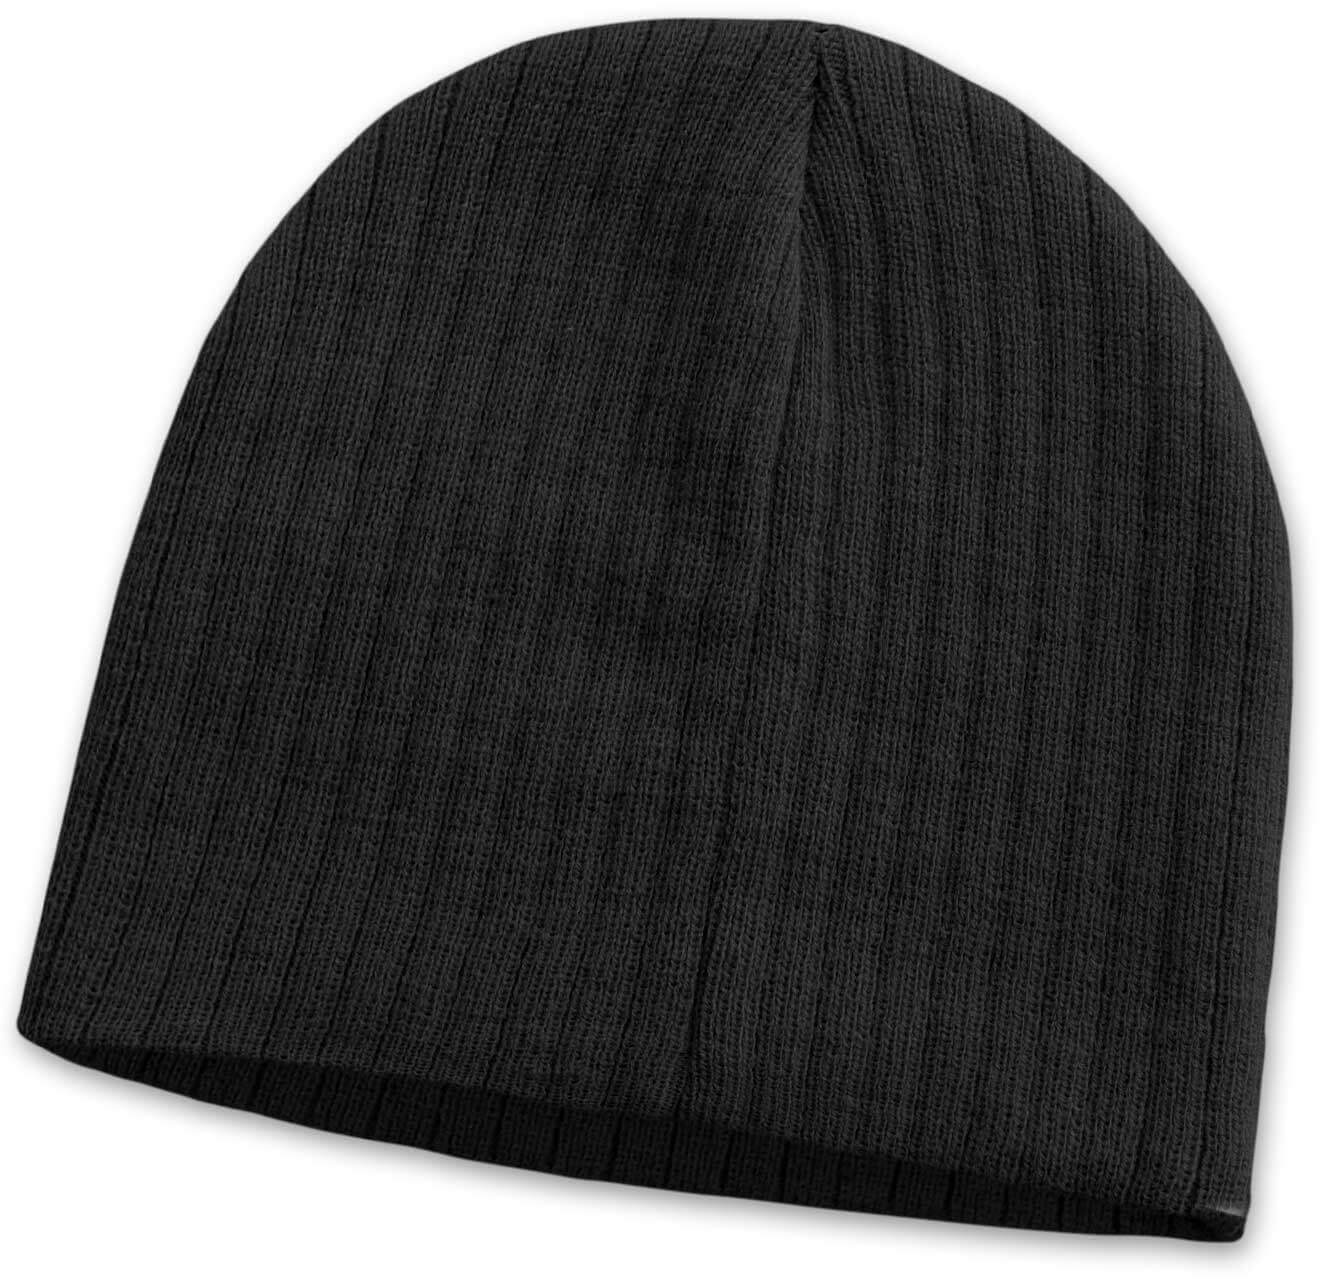 The Mode Cable Knit Beanie